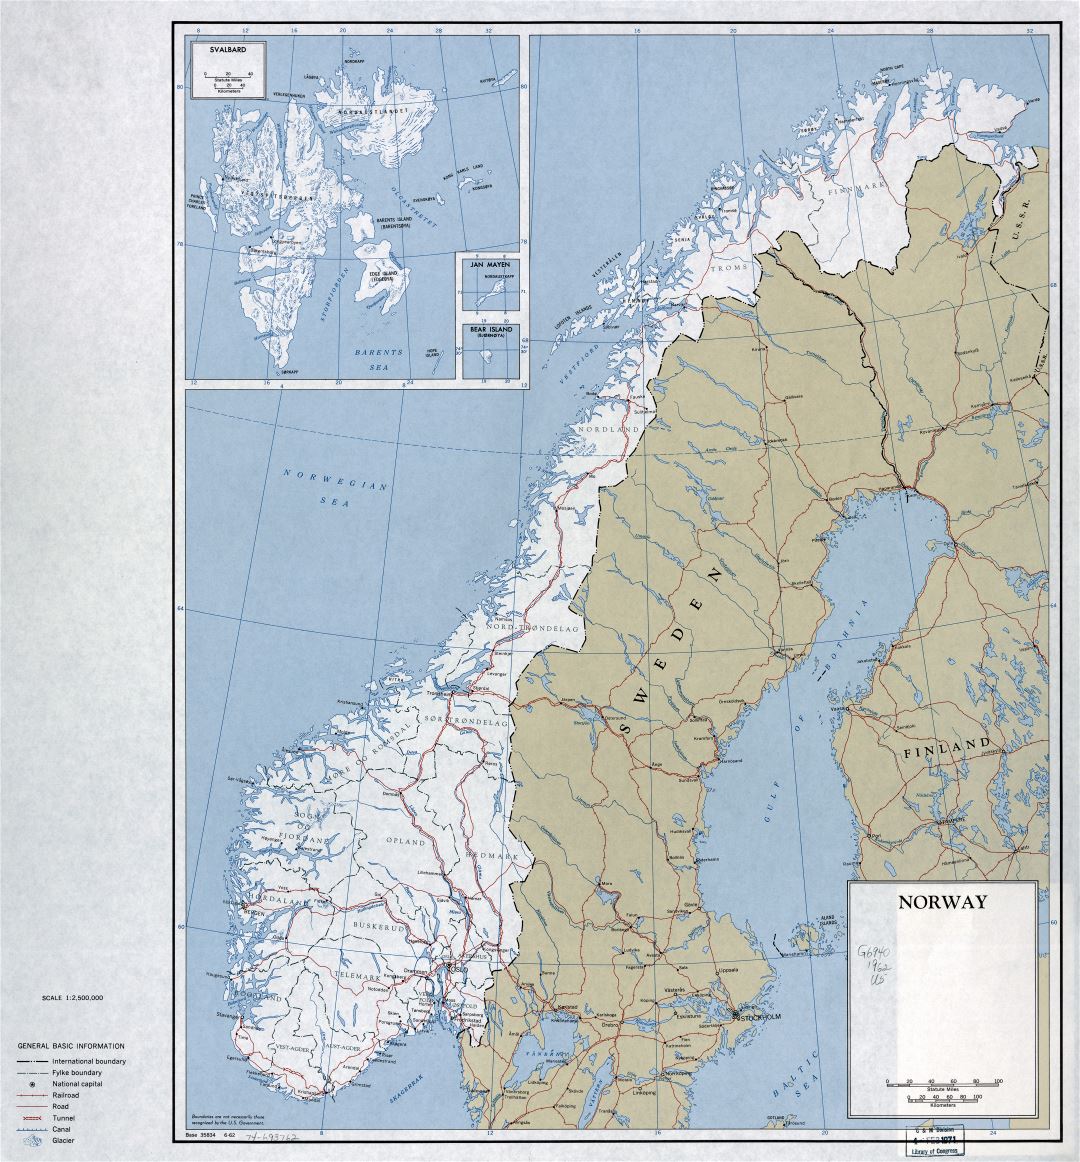 Large scale political and administrative map of Norway with roads, railroads and major cities - 1962